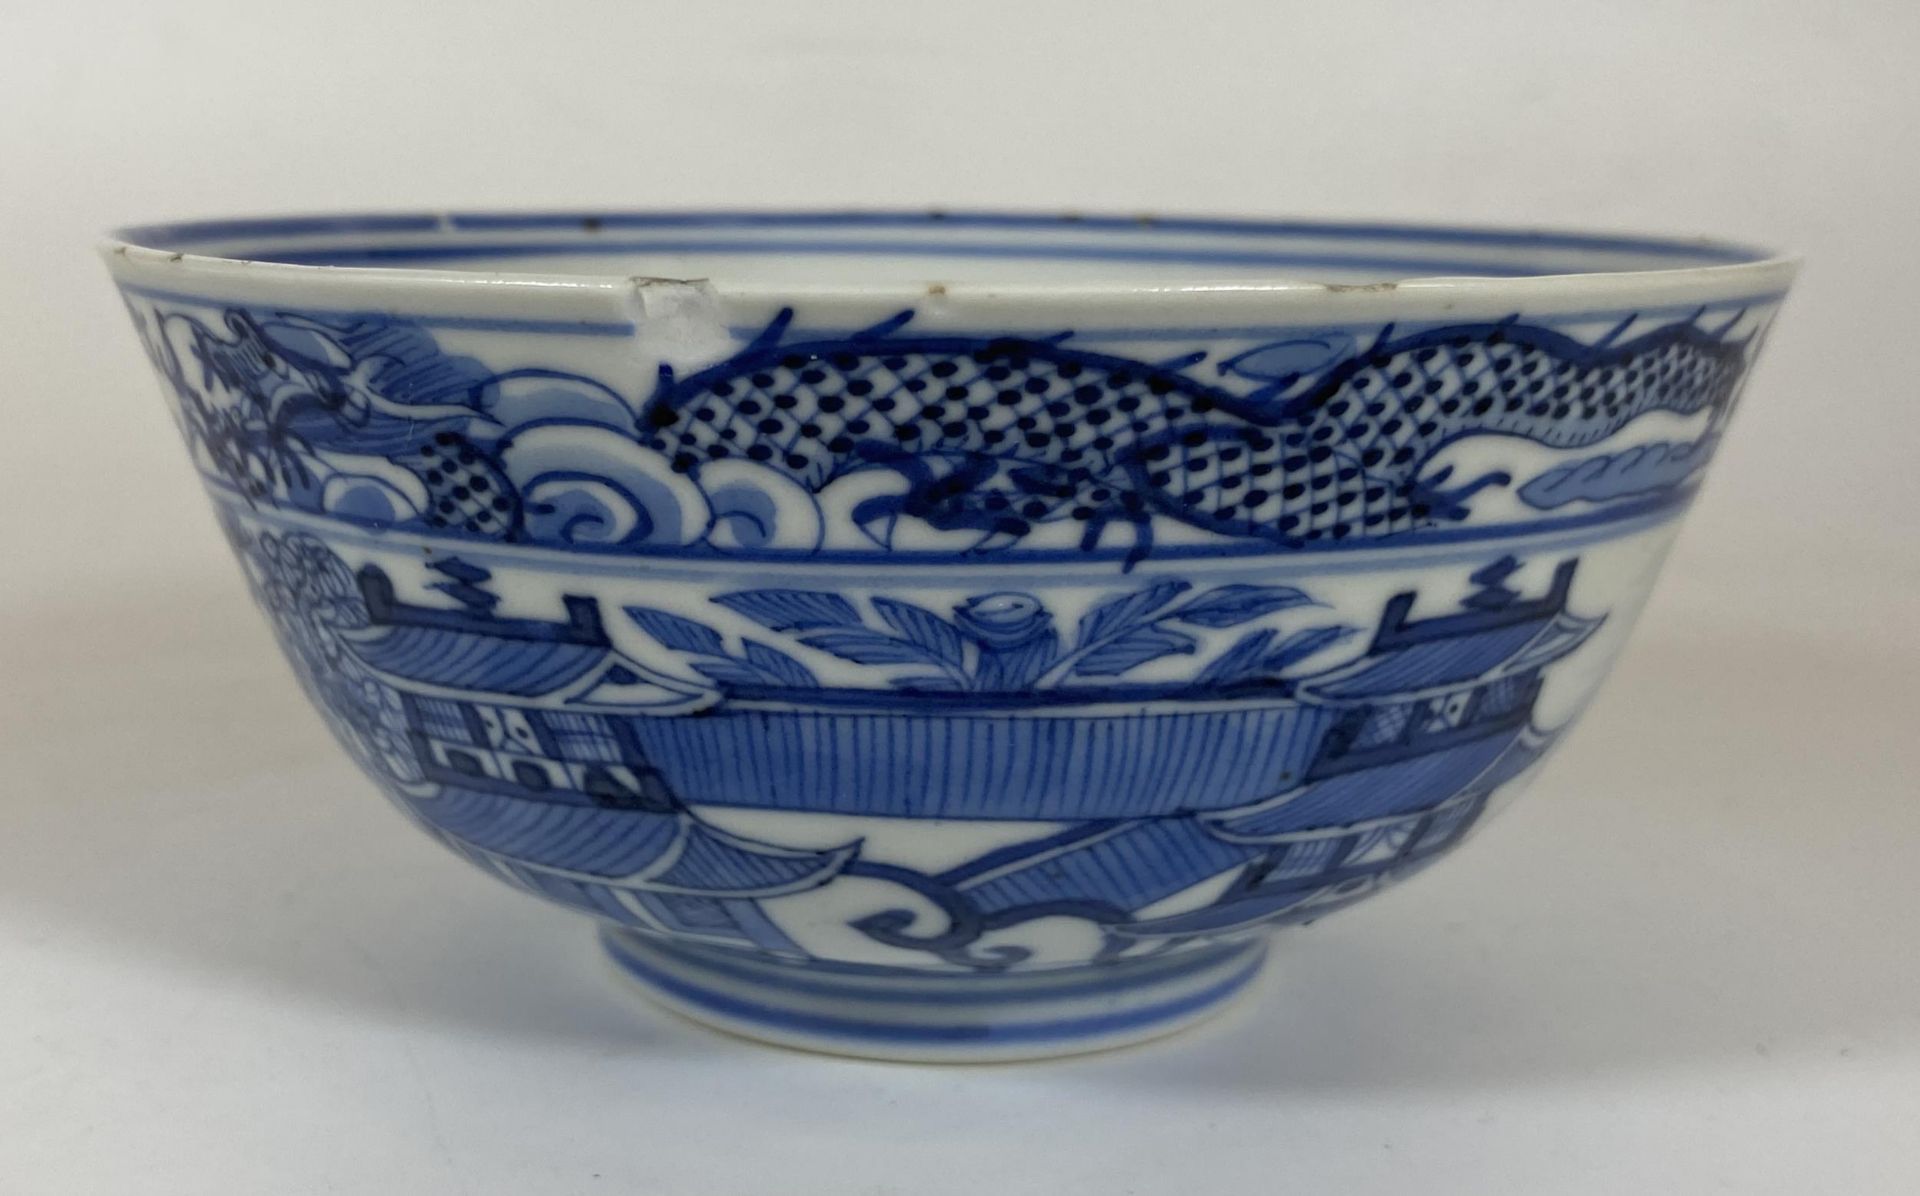 A LATE 19TH CENTURY CHINESE KANGXI REVIVAL BLUE AND WHITE PORCELAIN BOWL WITH DRAGON IN THE CLOUDS